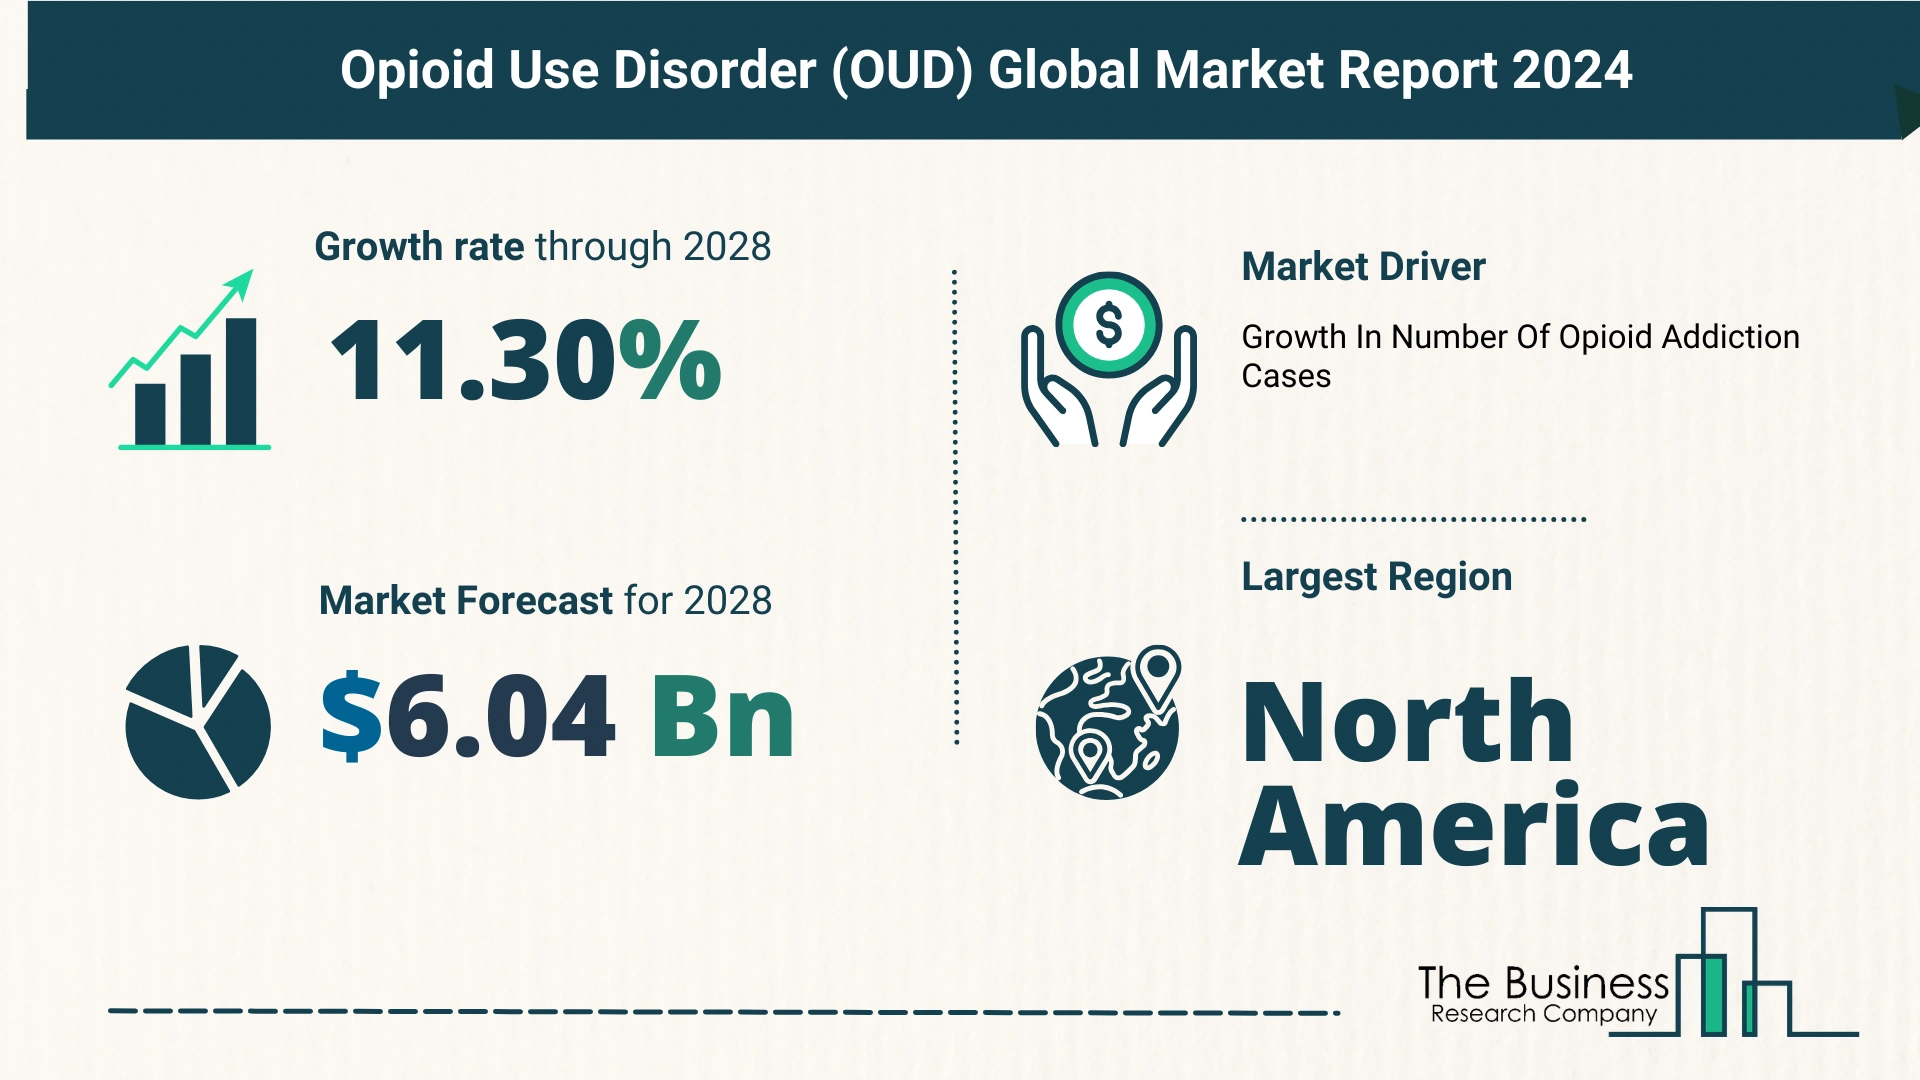 Global Opioid Use Disorder (OUD) Market Size